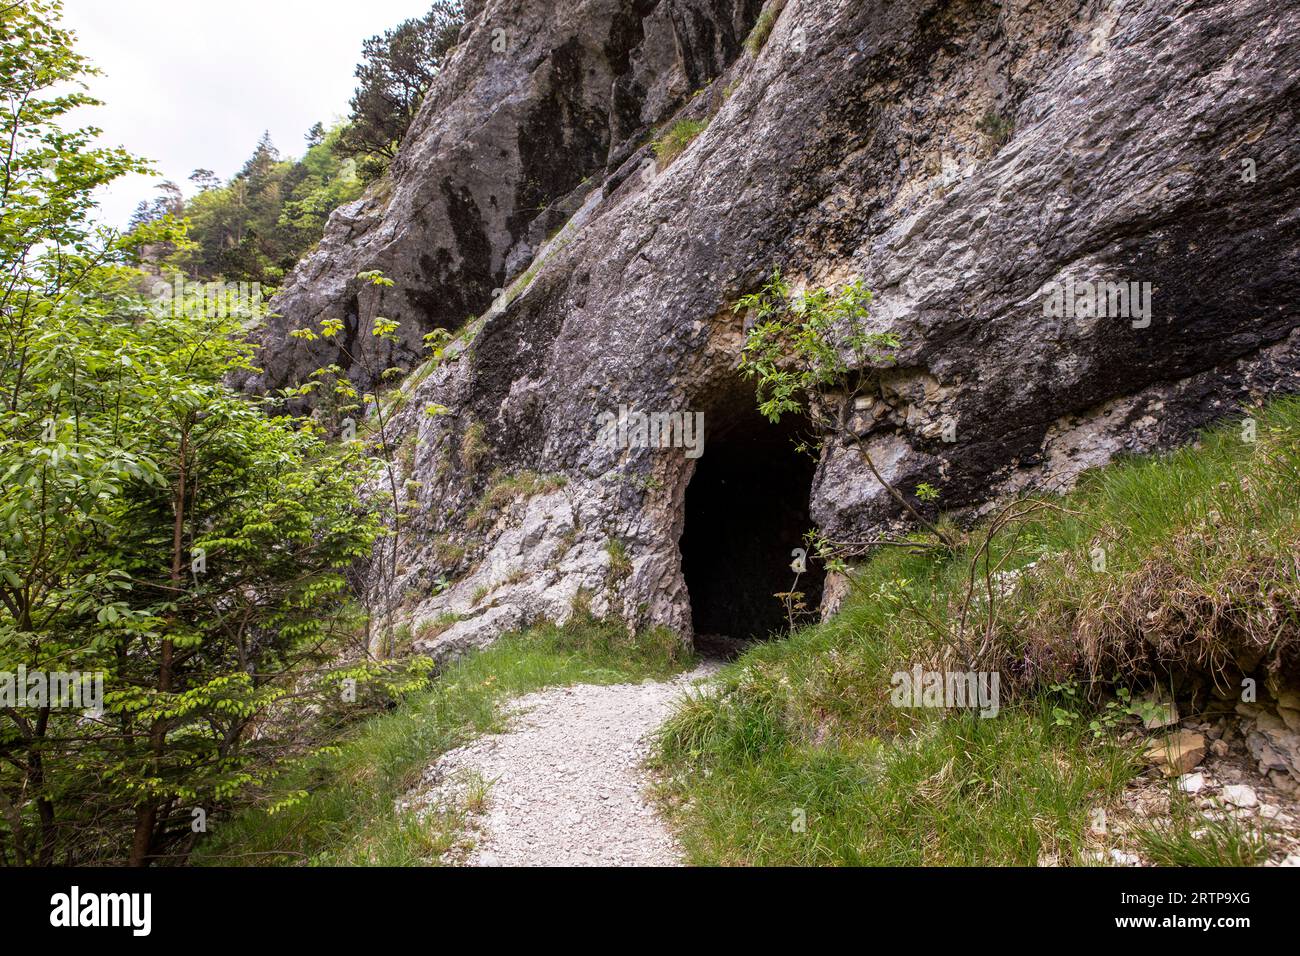 Rock wall with a dark hole, entrance to the cave in Jura mountains, hiking trail, Gorges de Court, Switzerland Stock Photo